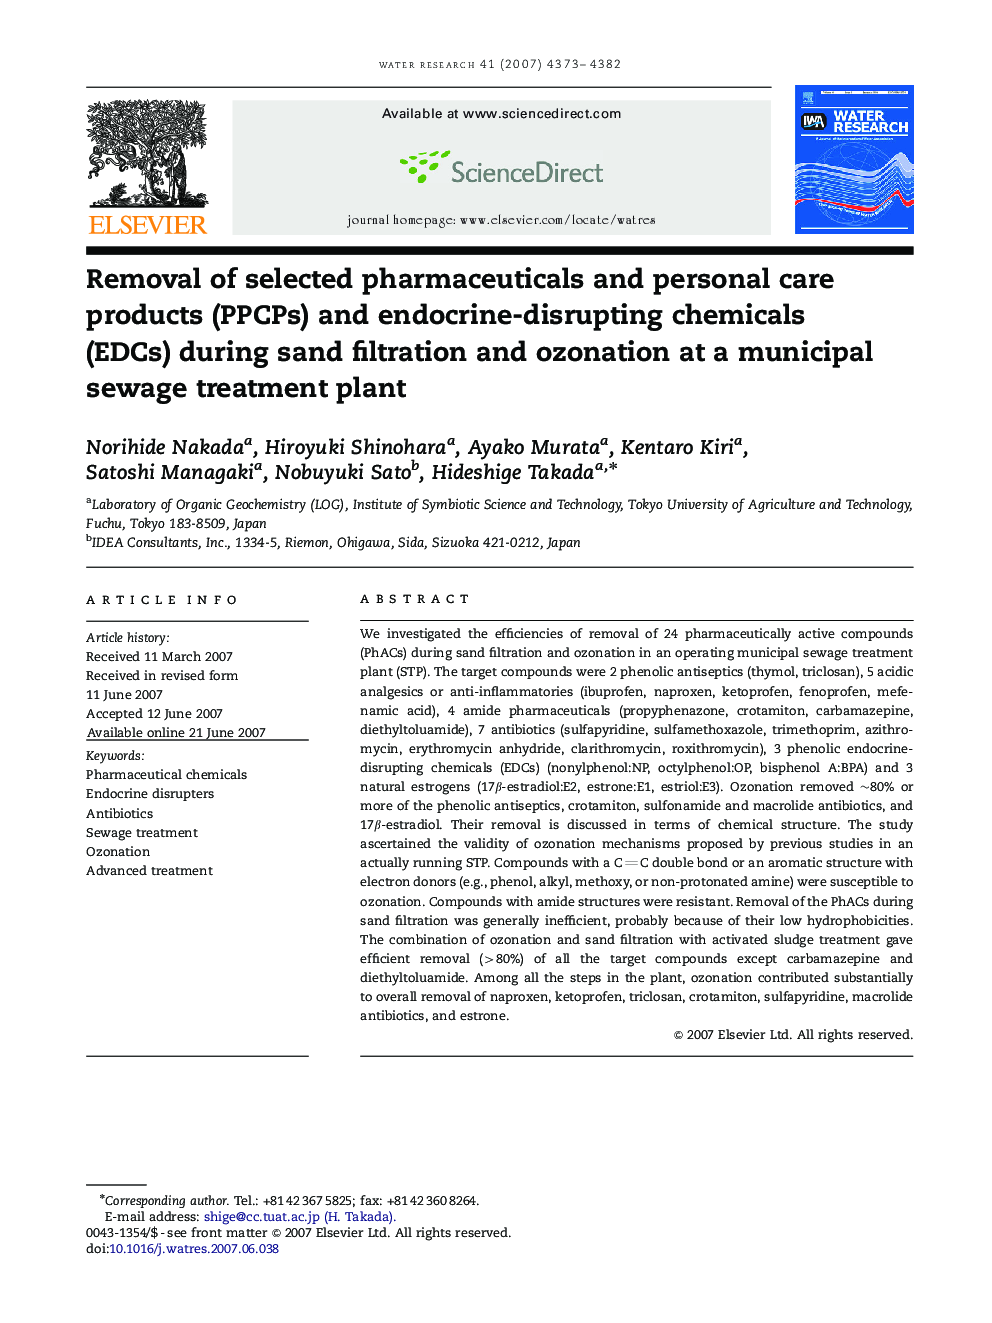 Removal of selected pharmaceuticals and personal care products (PPCPs) and endocrine-disrupting chemicals (EDCs) during sand filtration and ozonation at a municipal sewage treatment plant